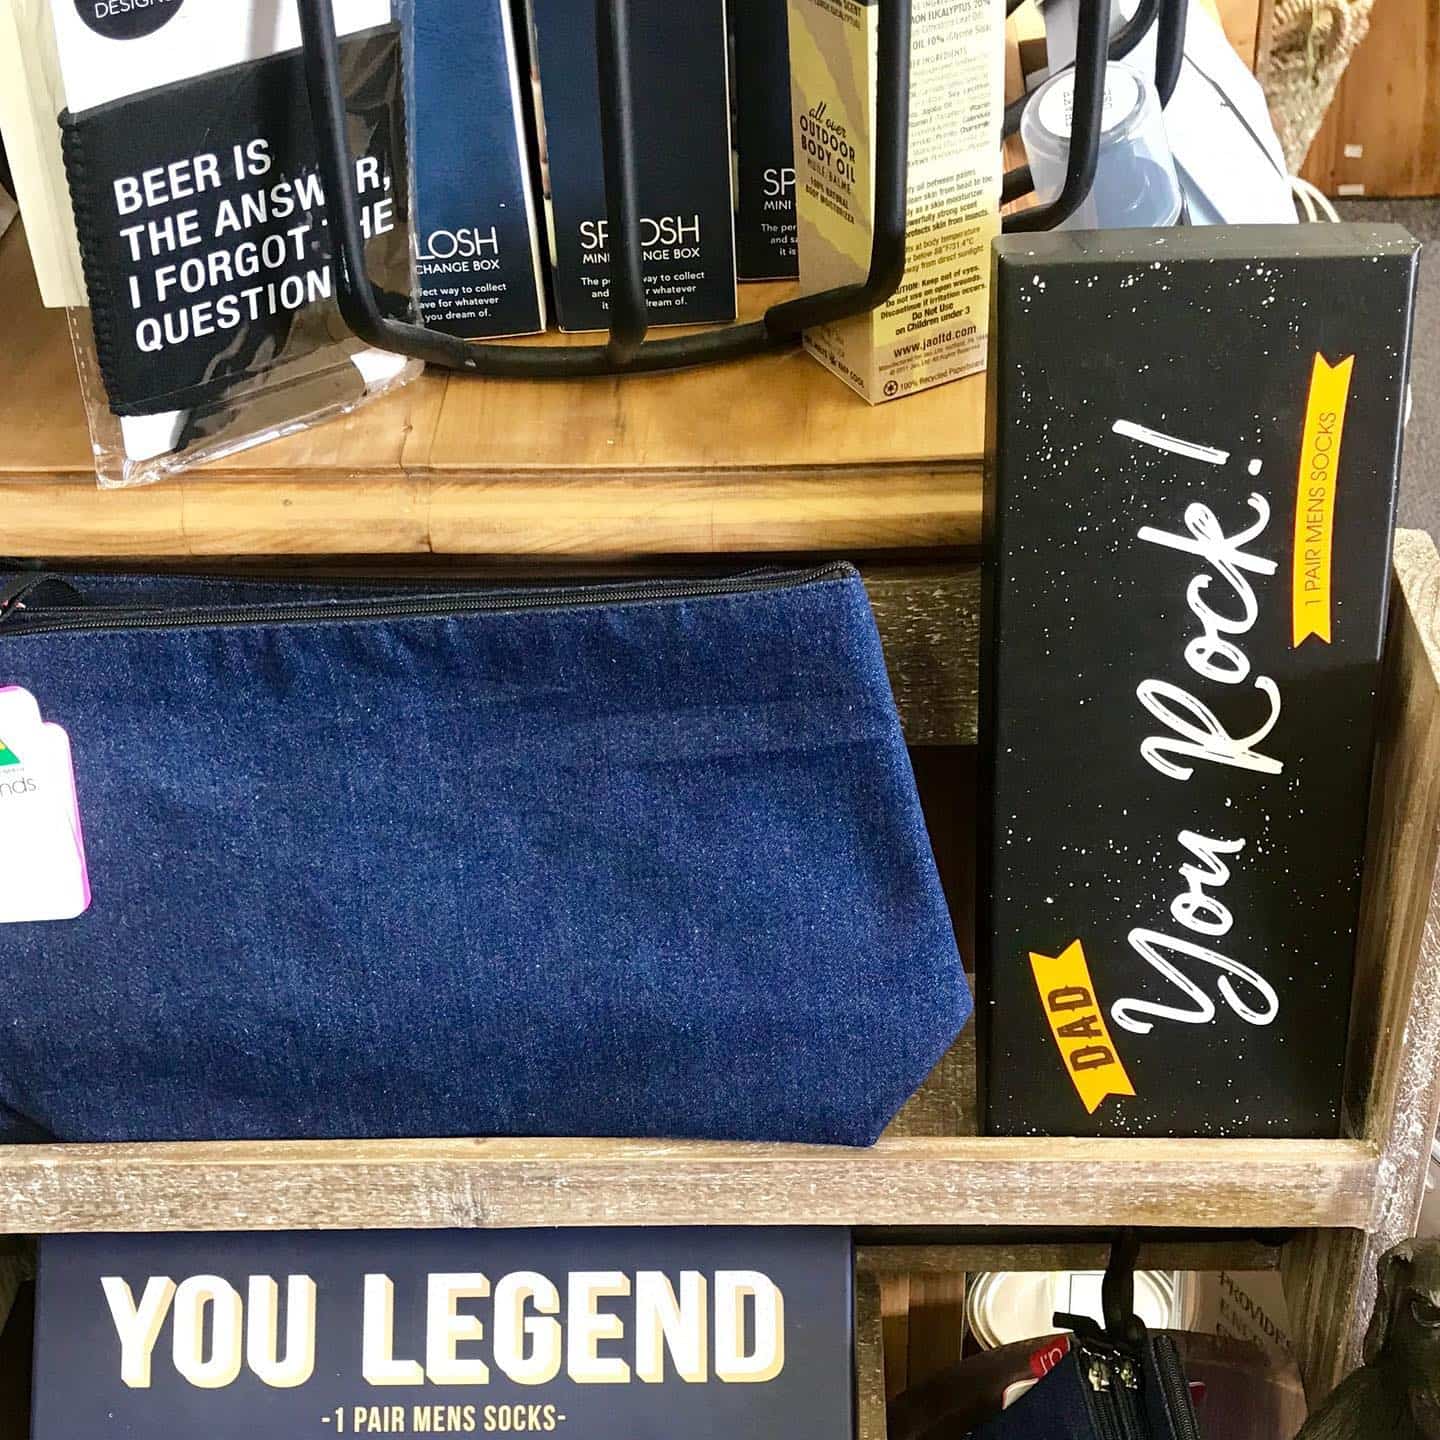 Men's Socks And Denim Purse In Store — Homewares Store In Central Highlands,QLD